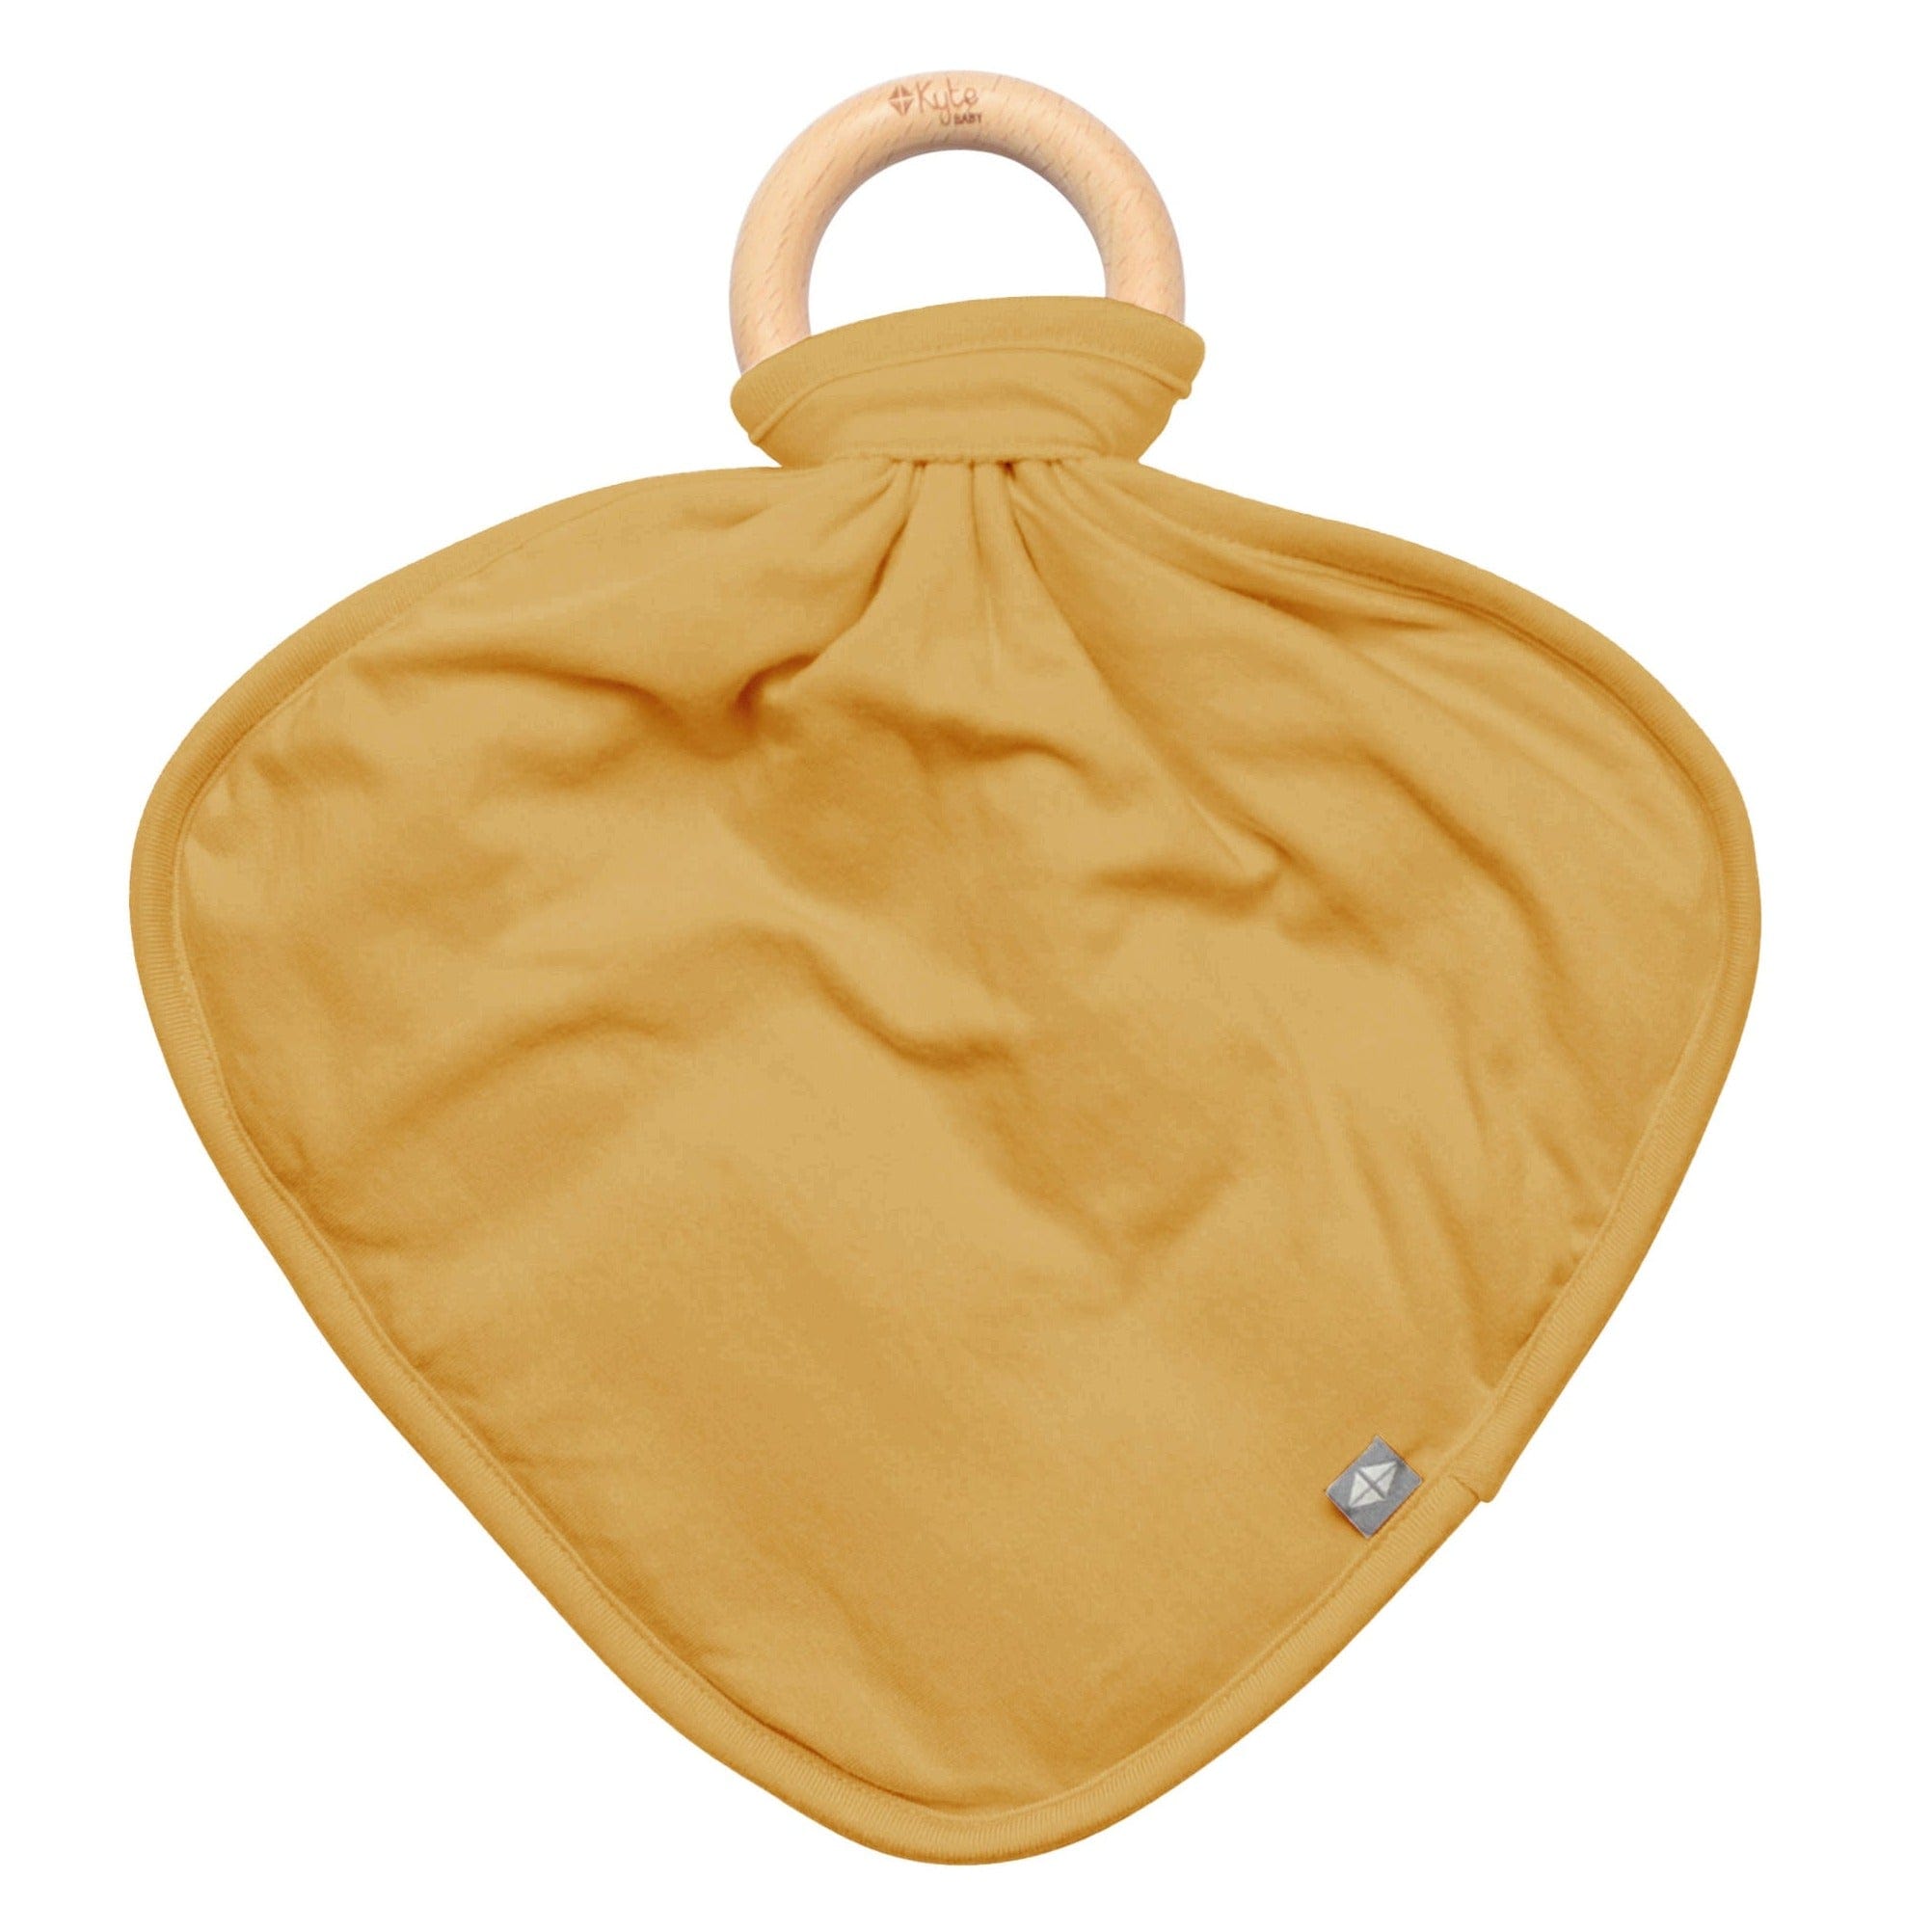 Kyte BABY Lovey Marigold / Infant Lovey in Marigold with Removable Teething Ring